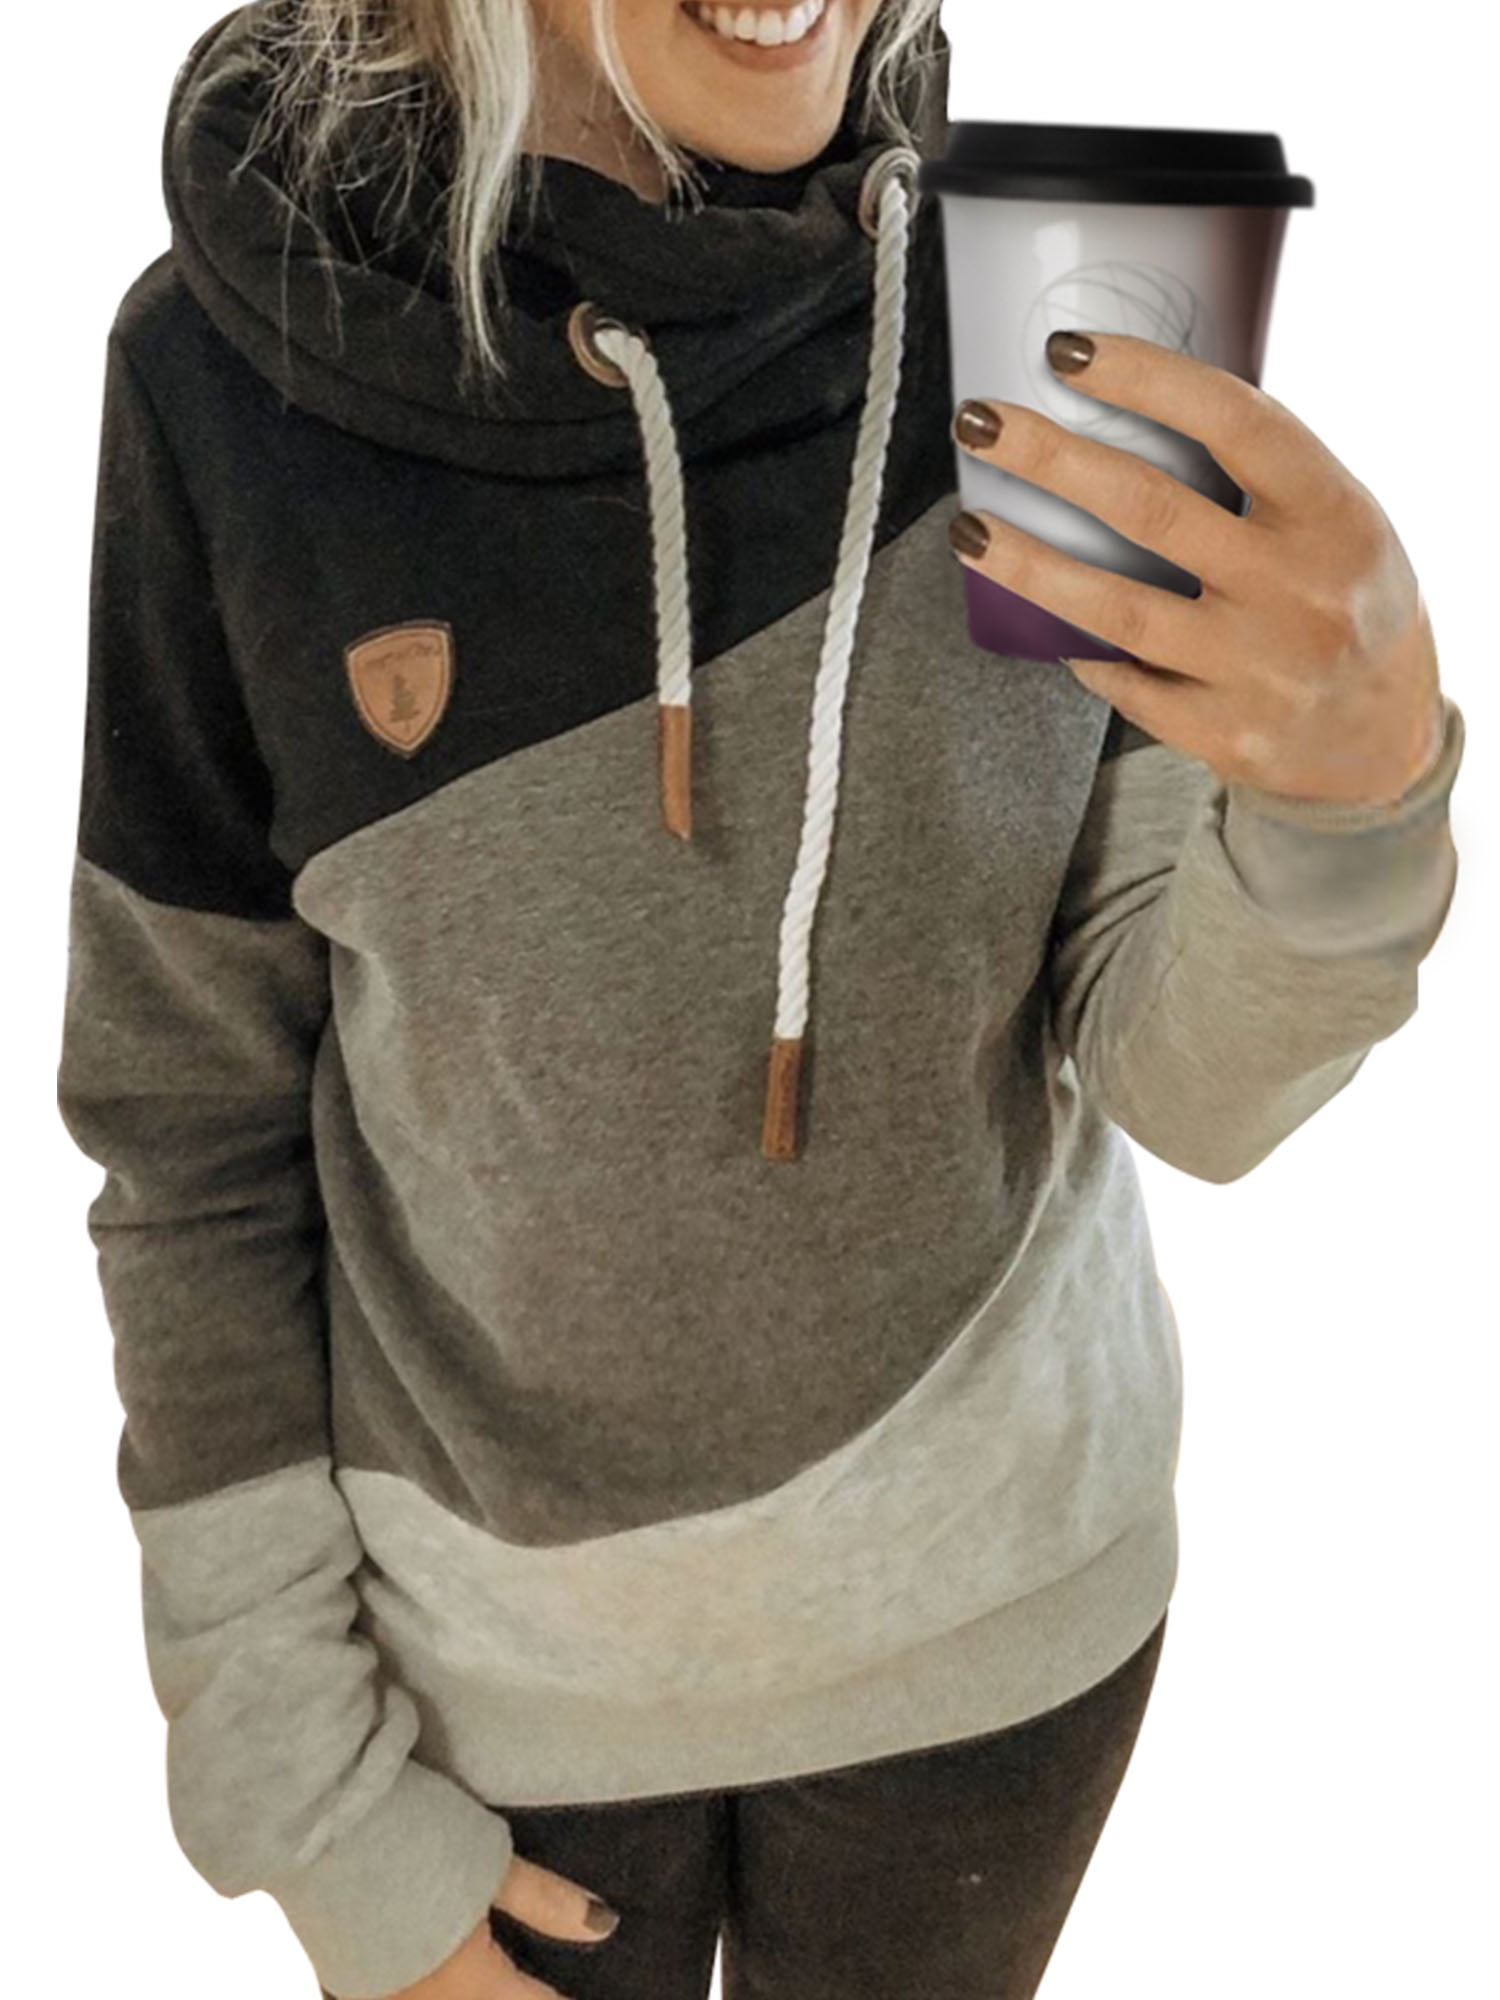 Women's Cowl Neck Hoodie Thermal Hooded Sweatshirts Loose Fit Fall Tops with Pockets 